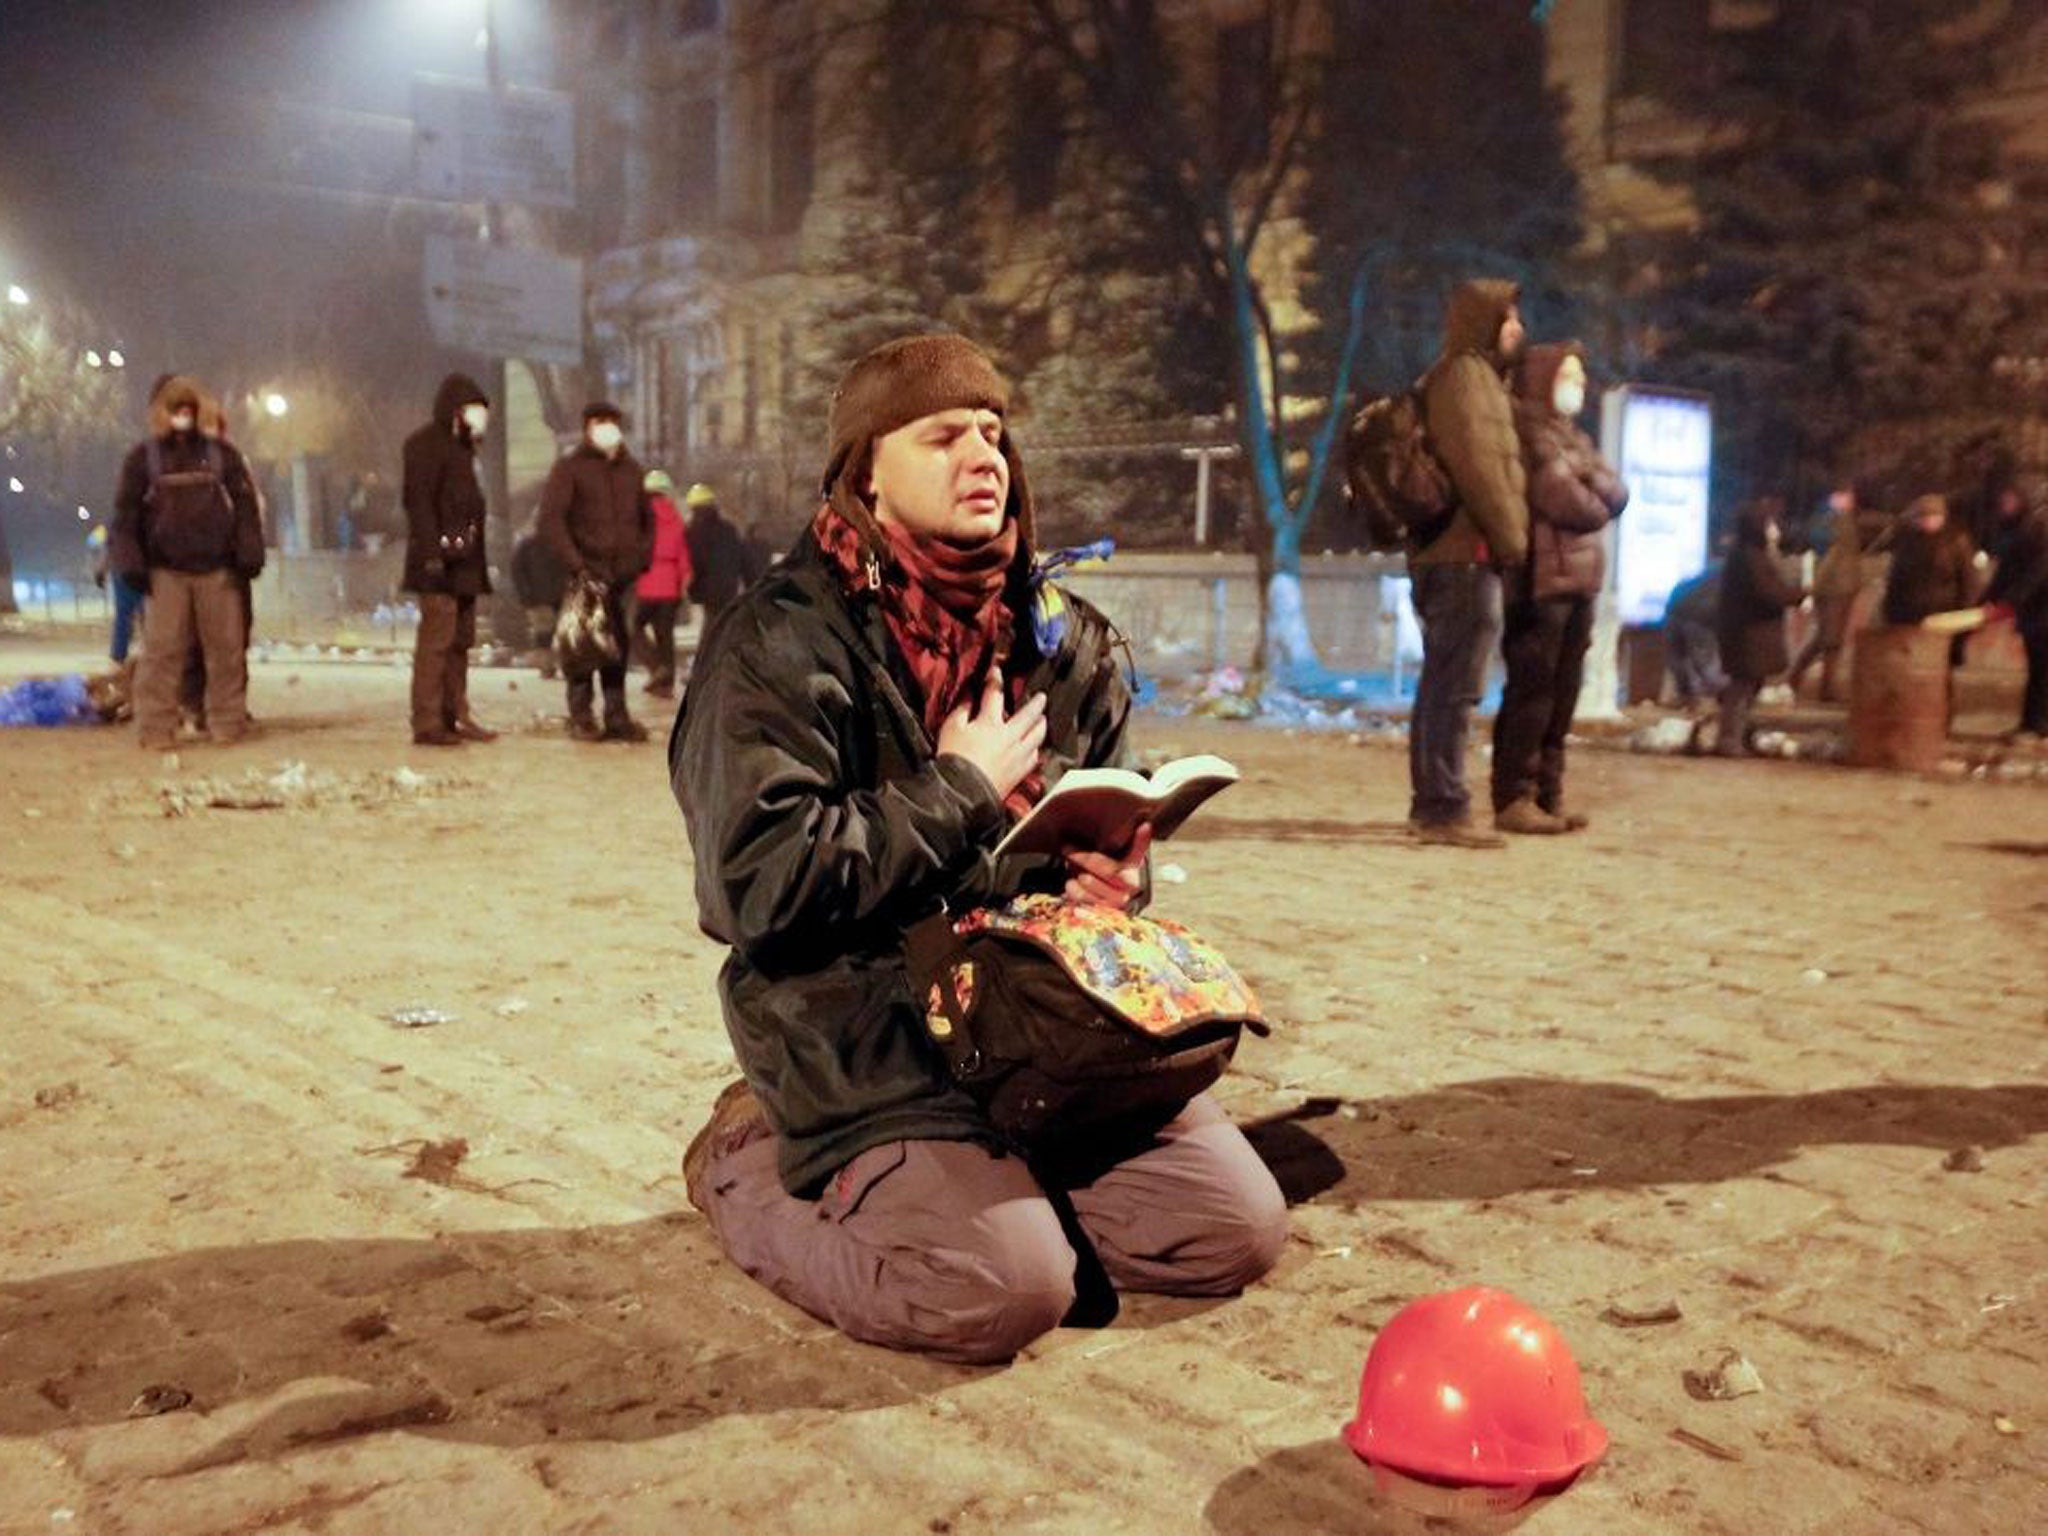 A protester prays as he holds an open Bible during an anti-government protest in downtown Kiev